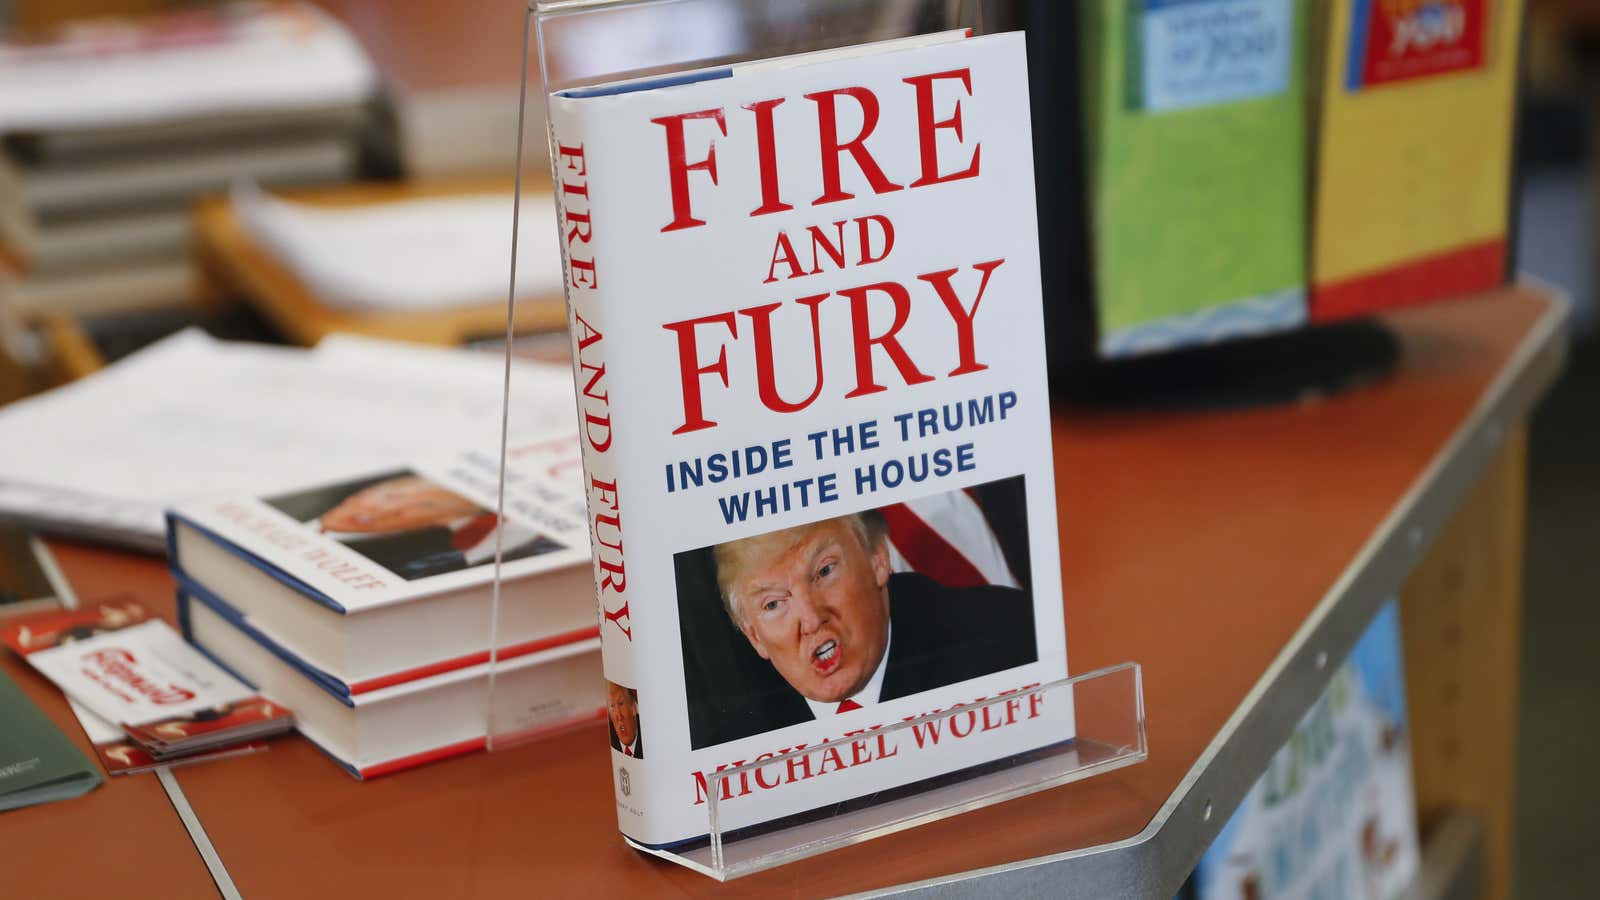 “Fire and Fury presents a man in the White House who is profoundly ignorant of politics, policy, and anything resembling the substance of perhaps the world’s most demanding job.”